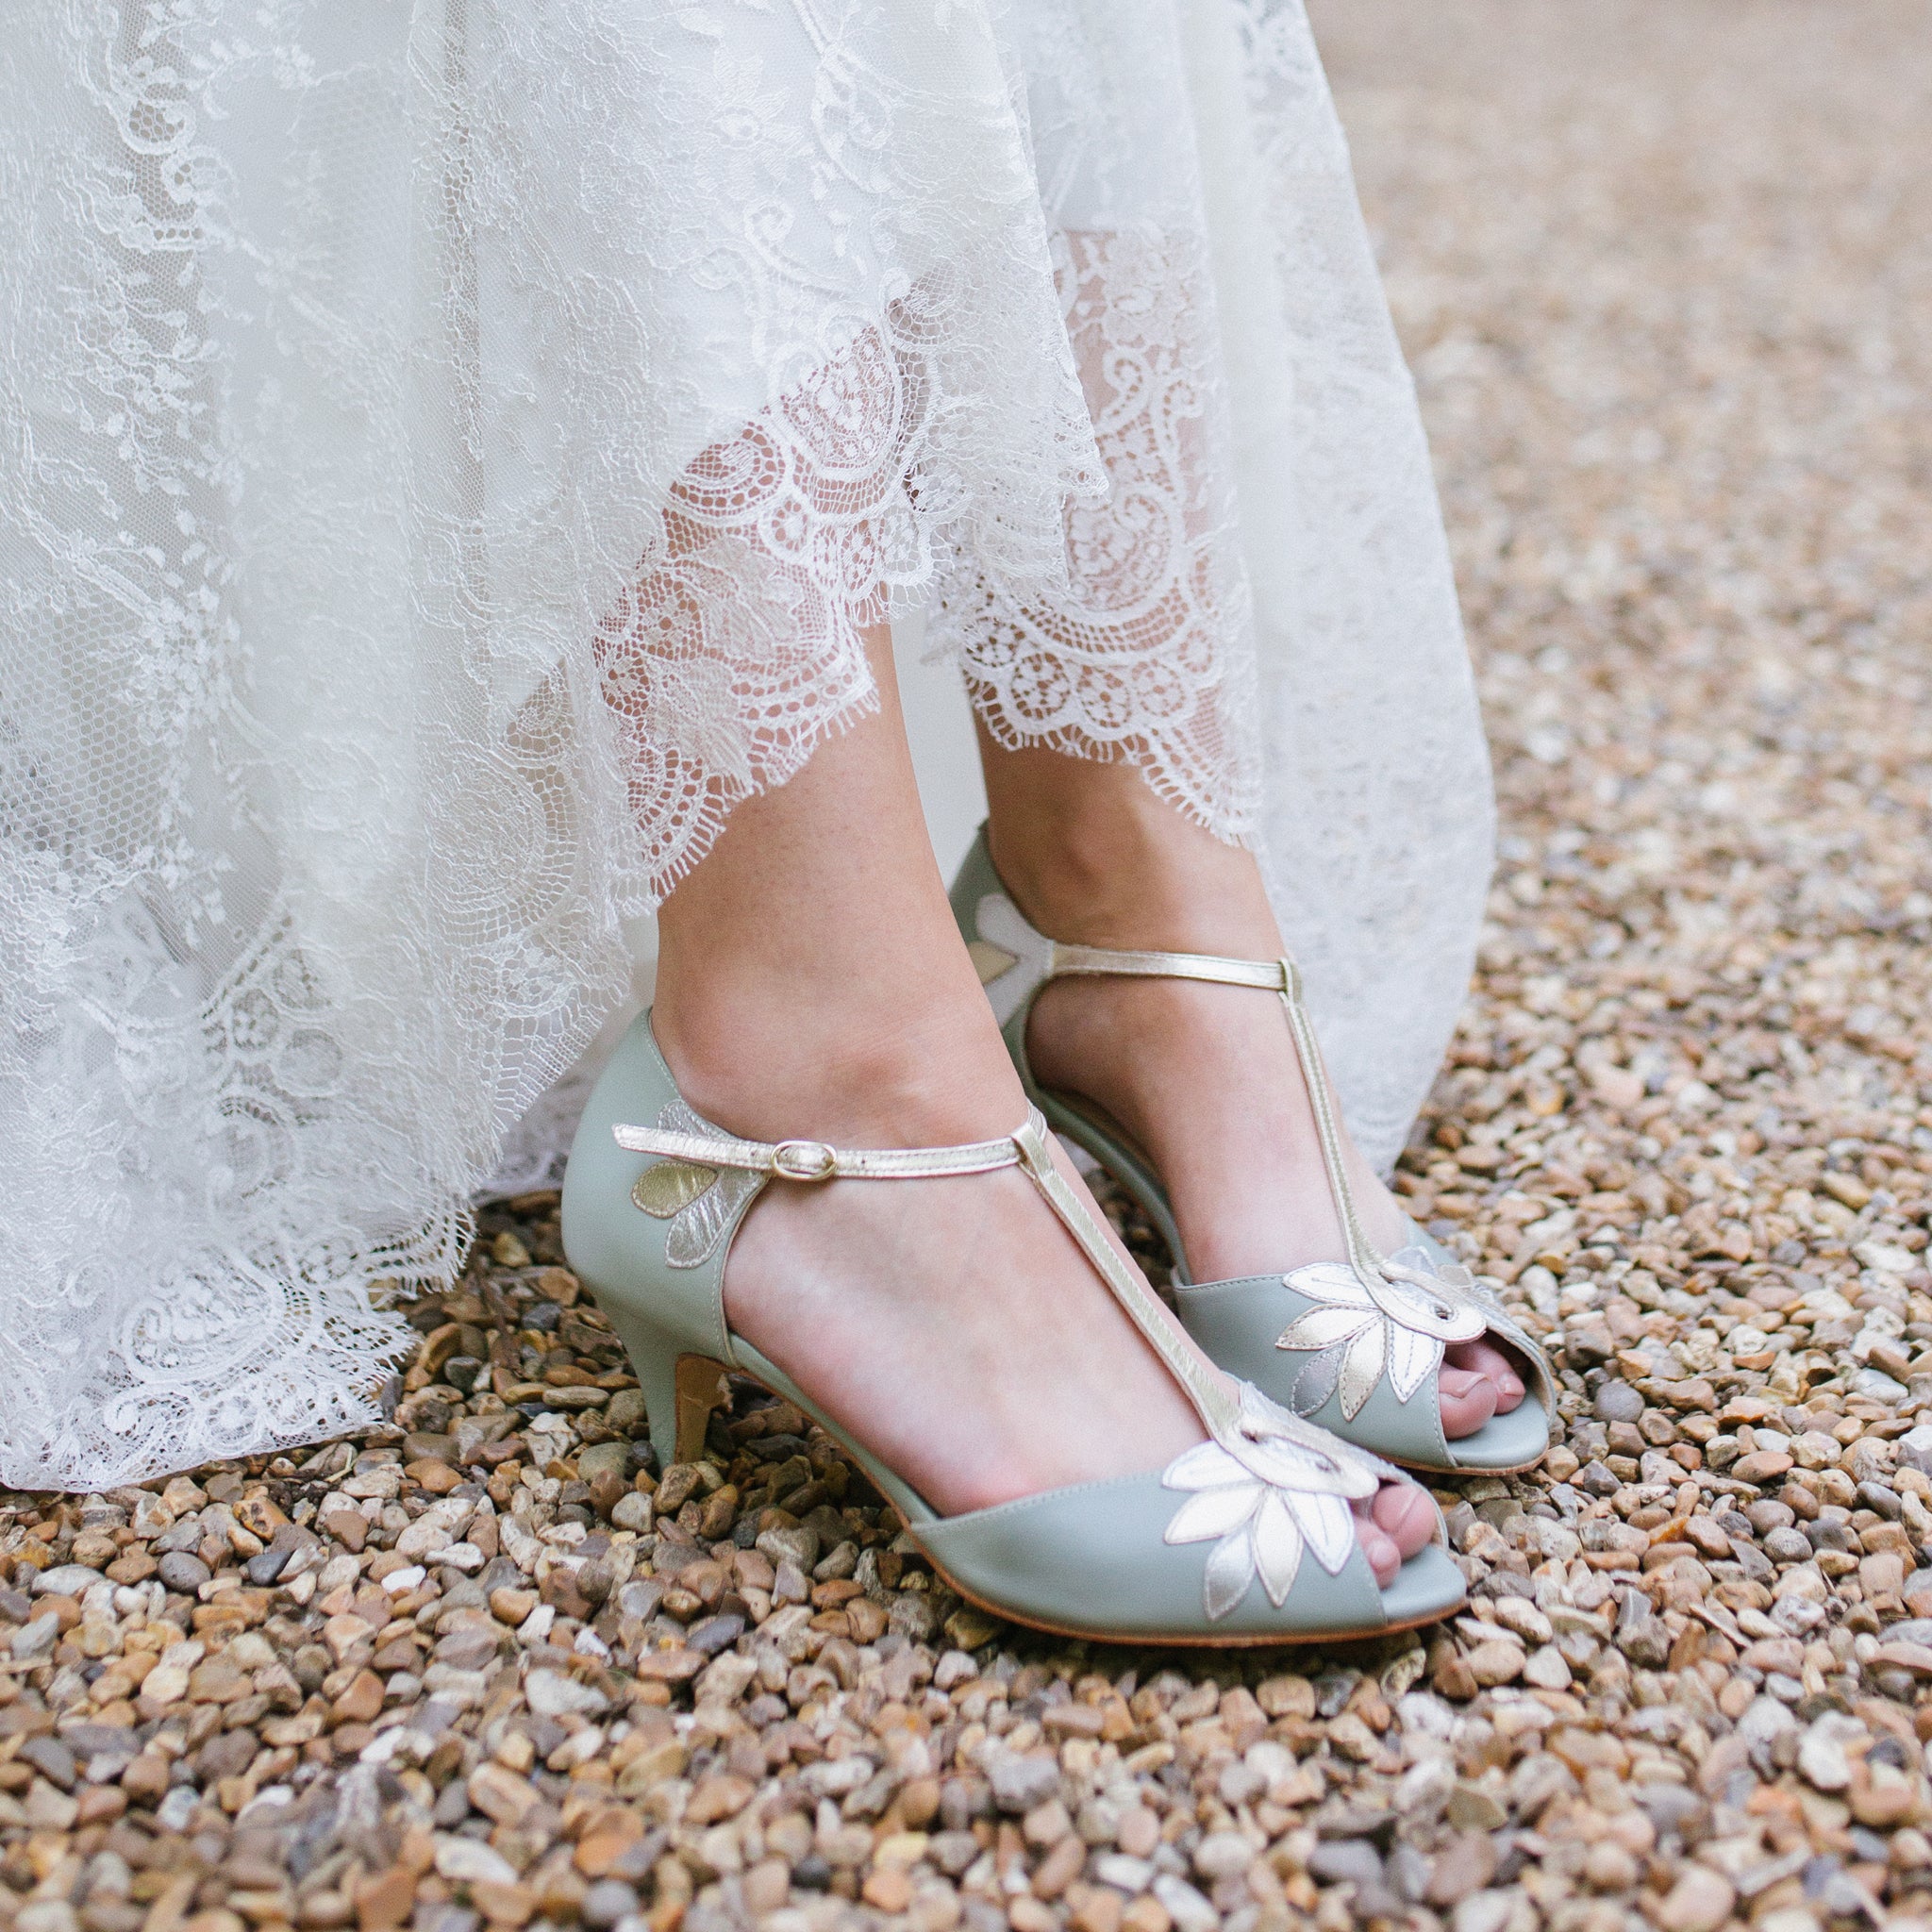 Top Wedding Dress Shoe of the decade Don t miss out | usawedding1